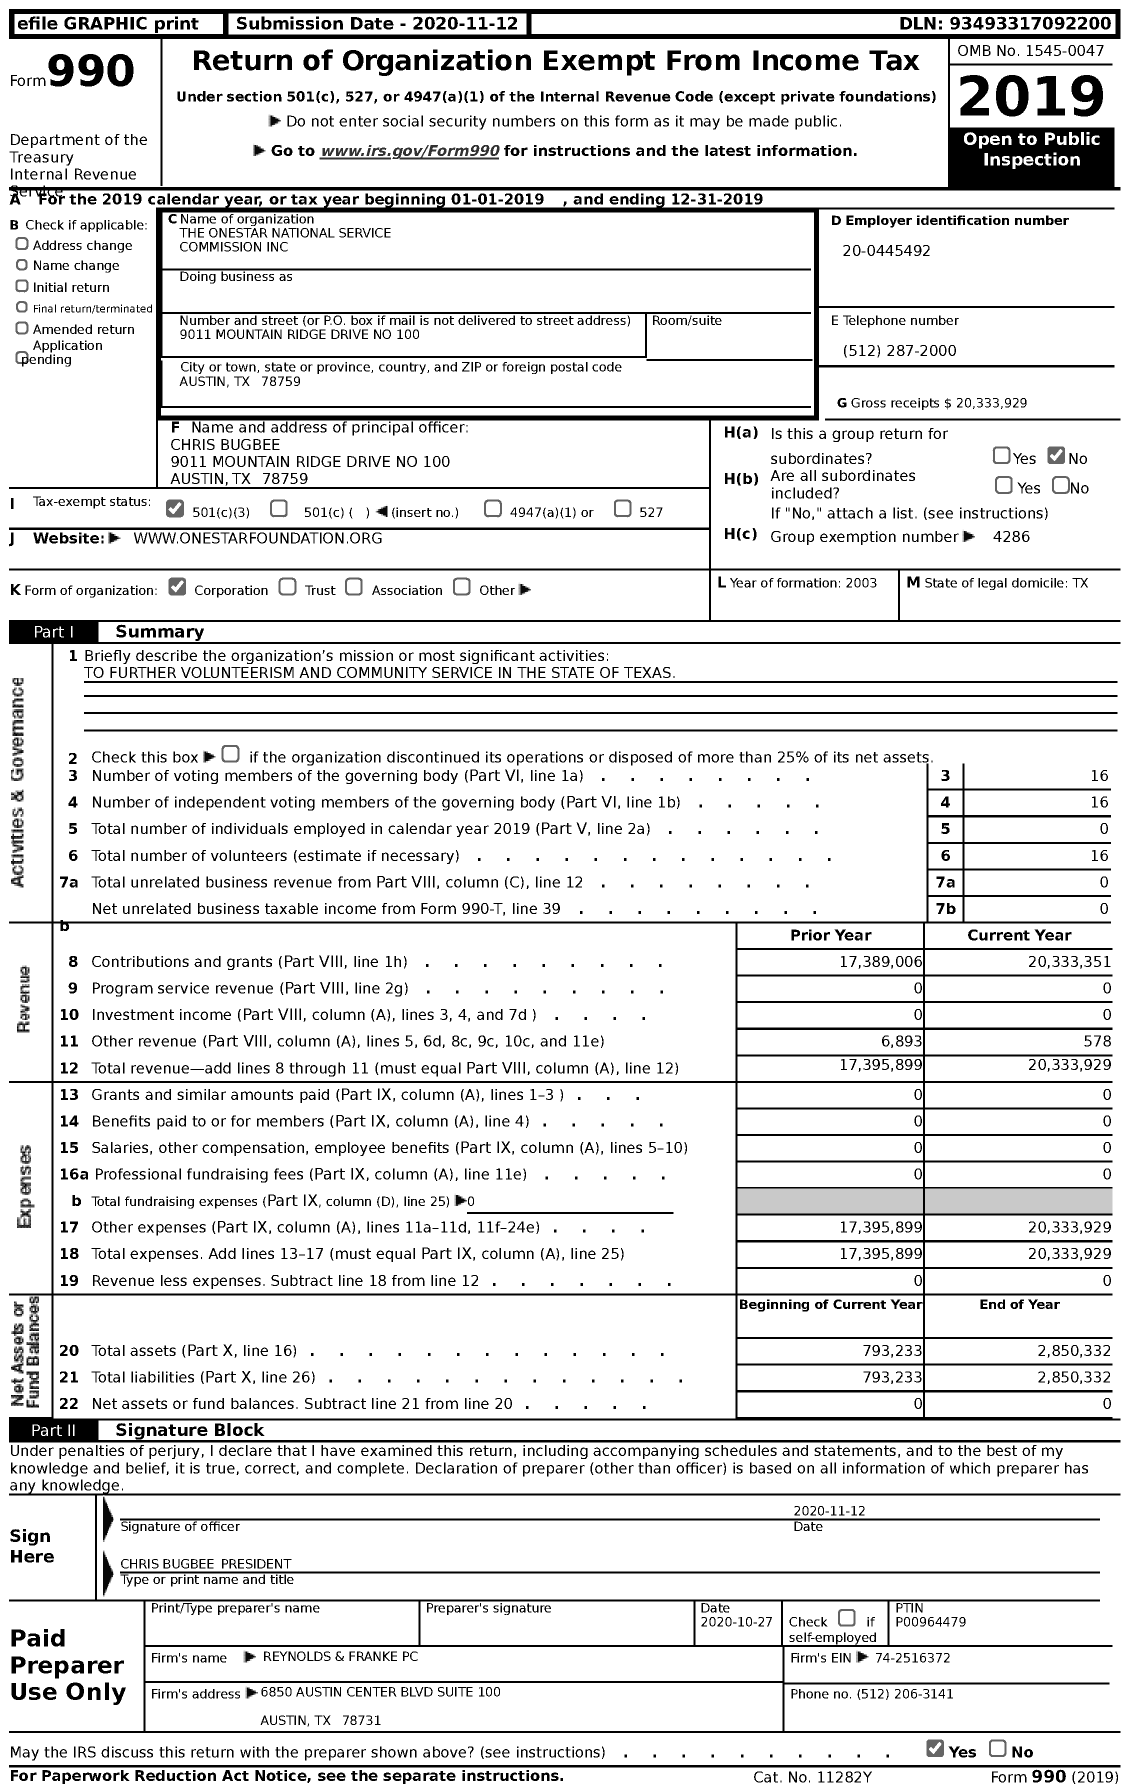 Image of first page of 2019 Form 990 for The Onestar National Service Commission